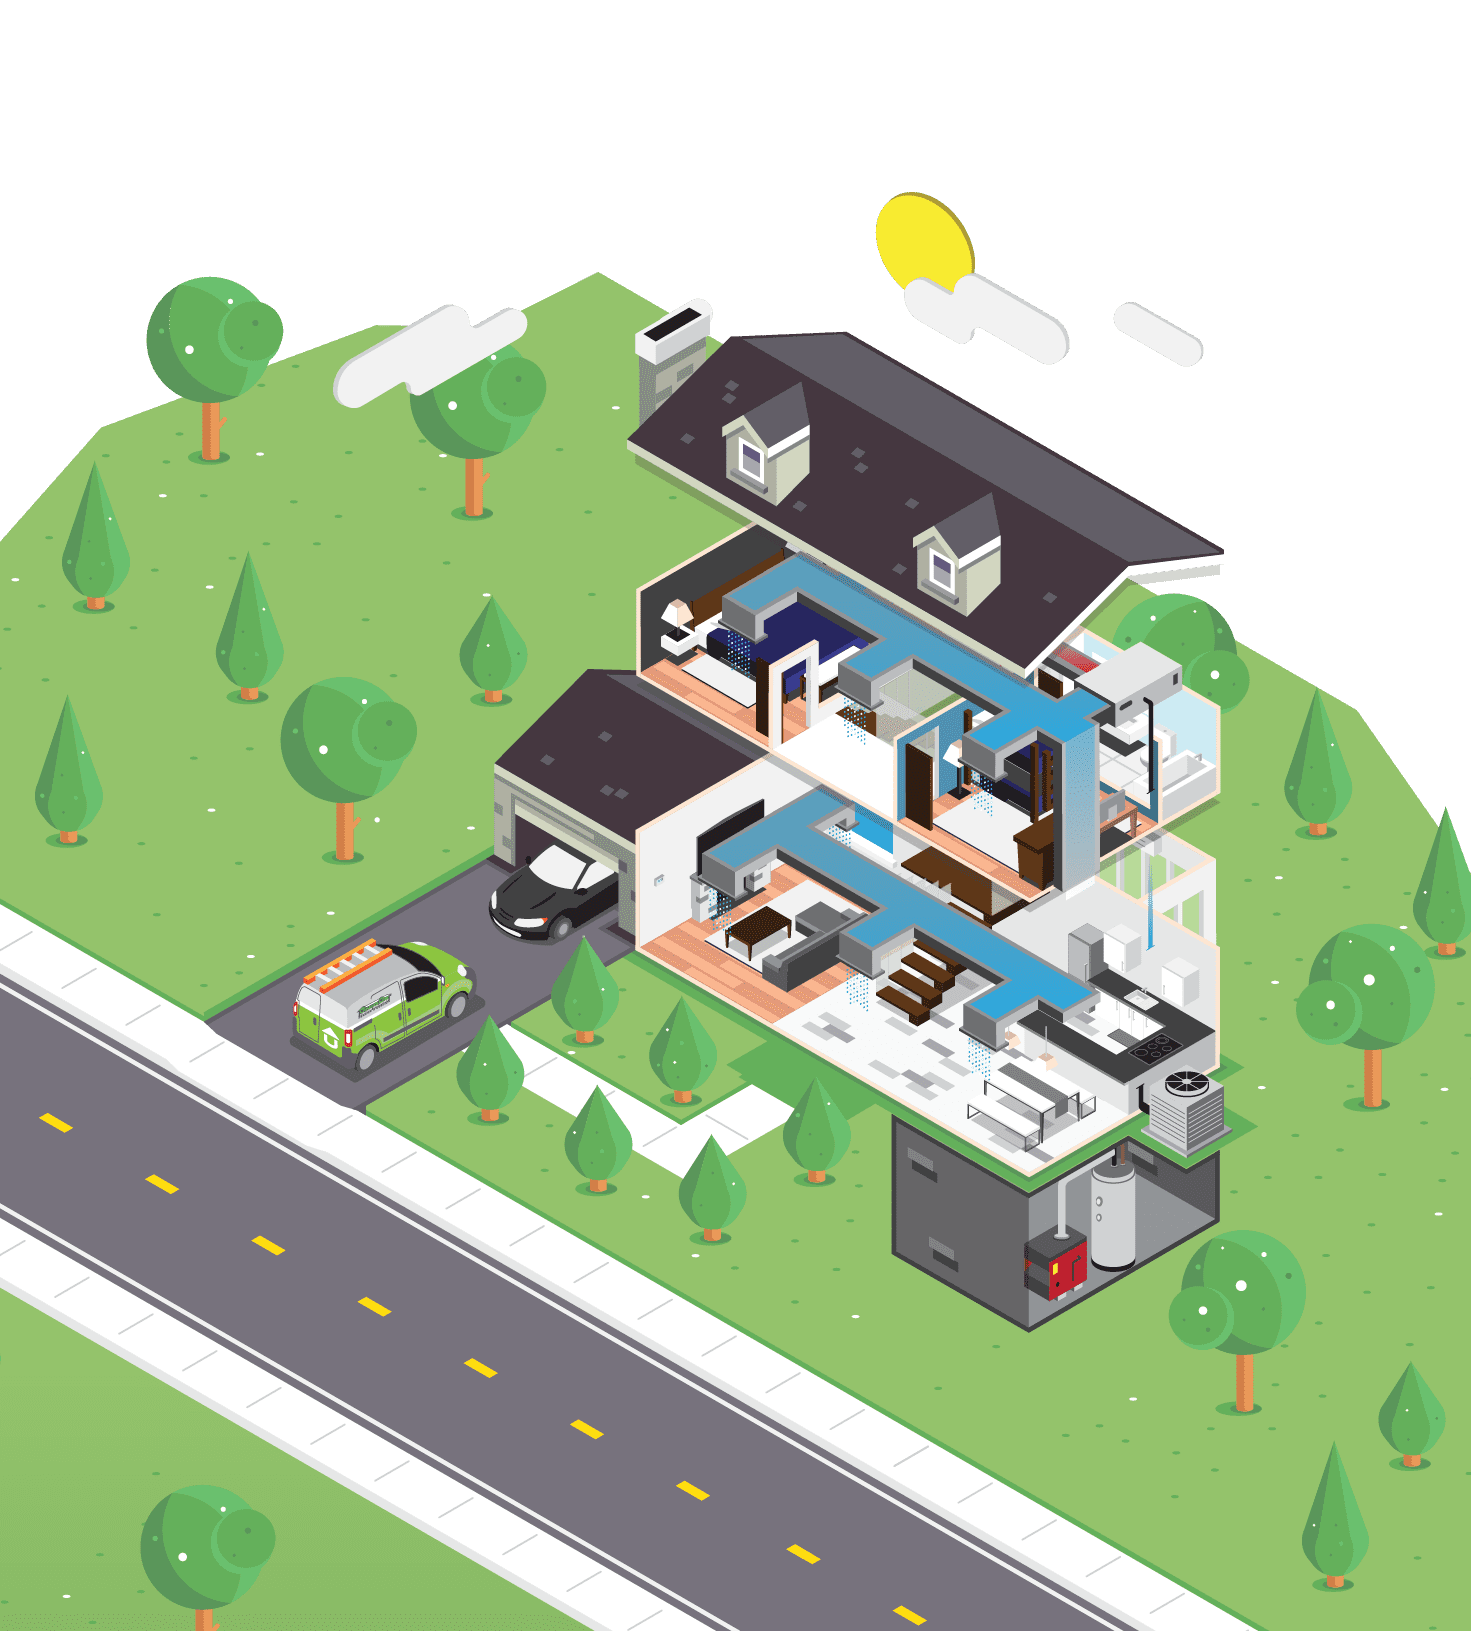 Illustration of an expanded Summer home showing how air flows within